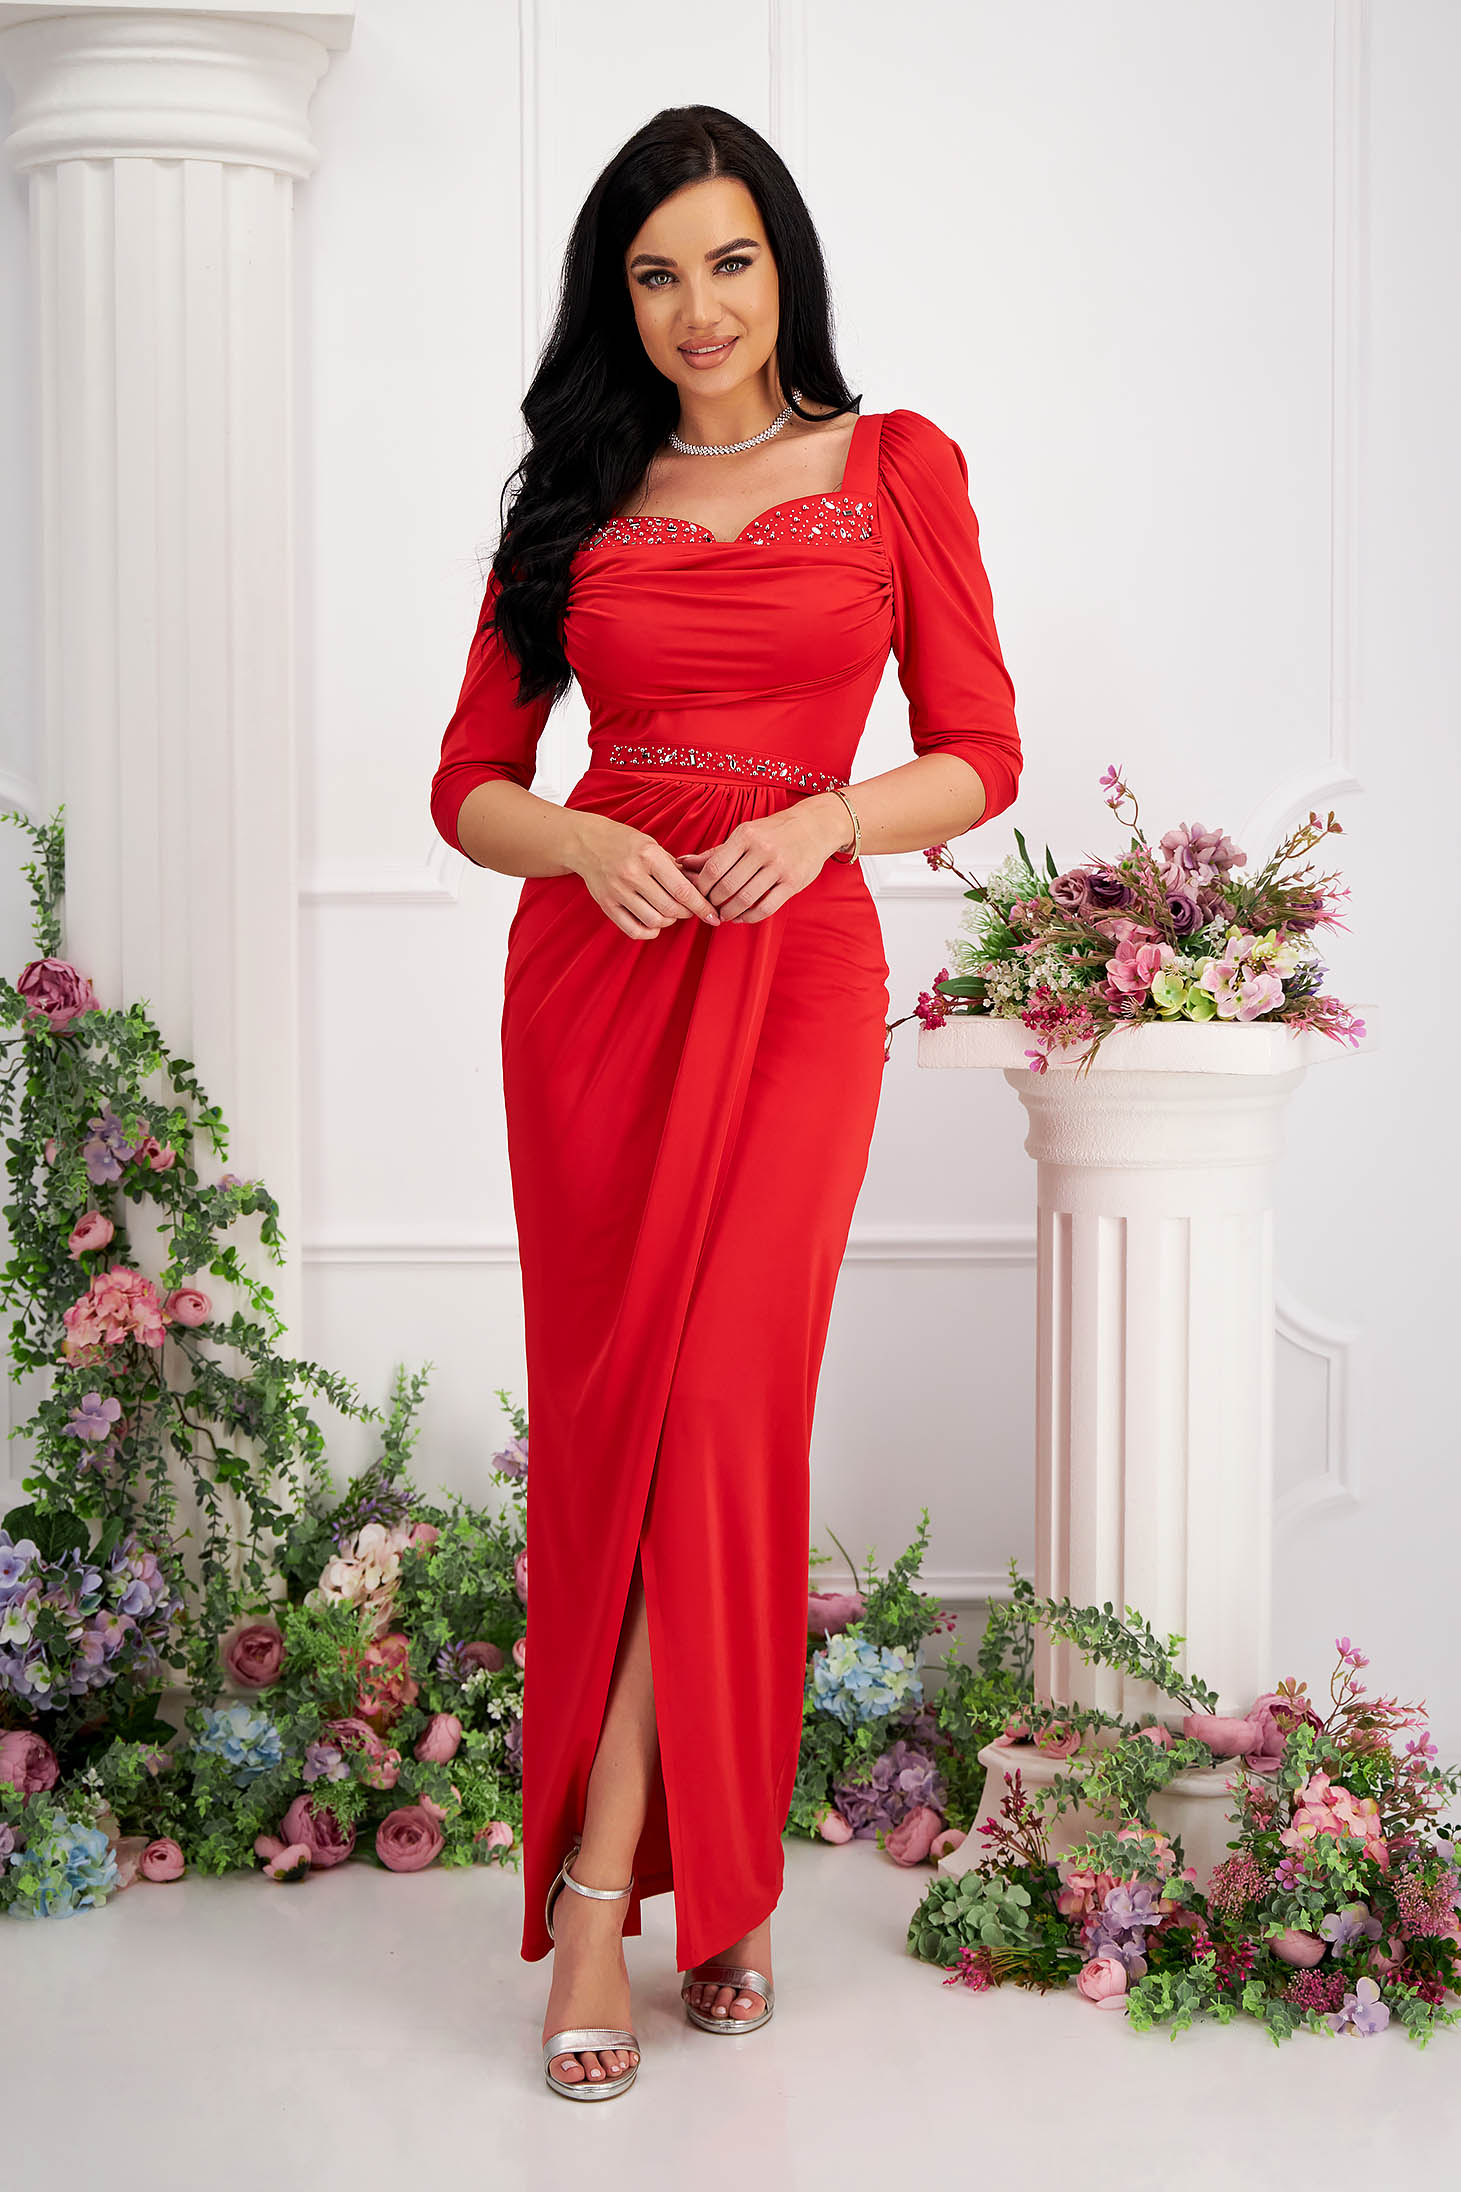 Red dress lycra long wrap around high shoulders accessorized with belt with crystal embellished details